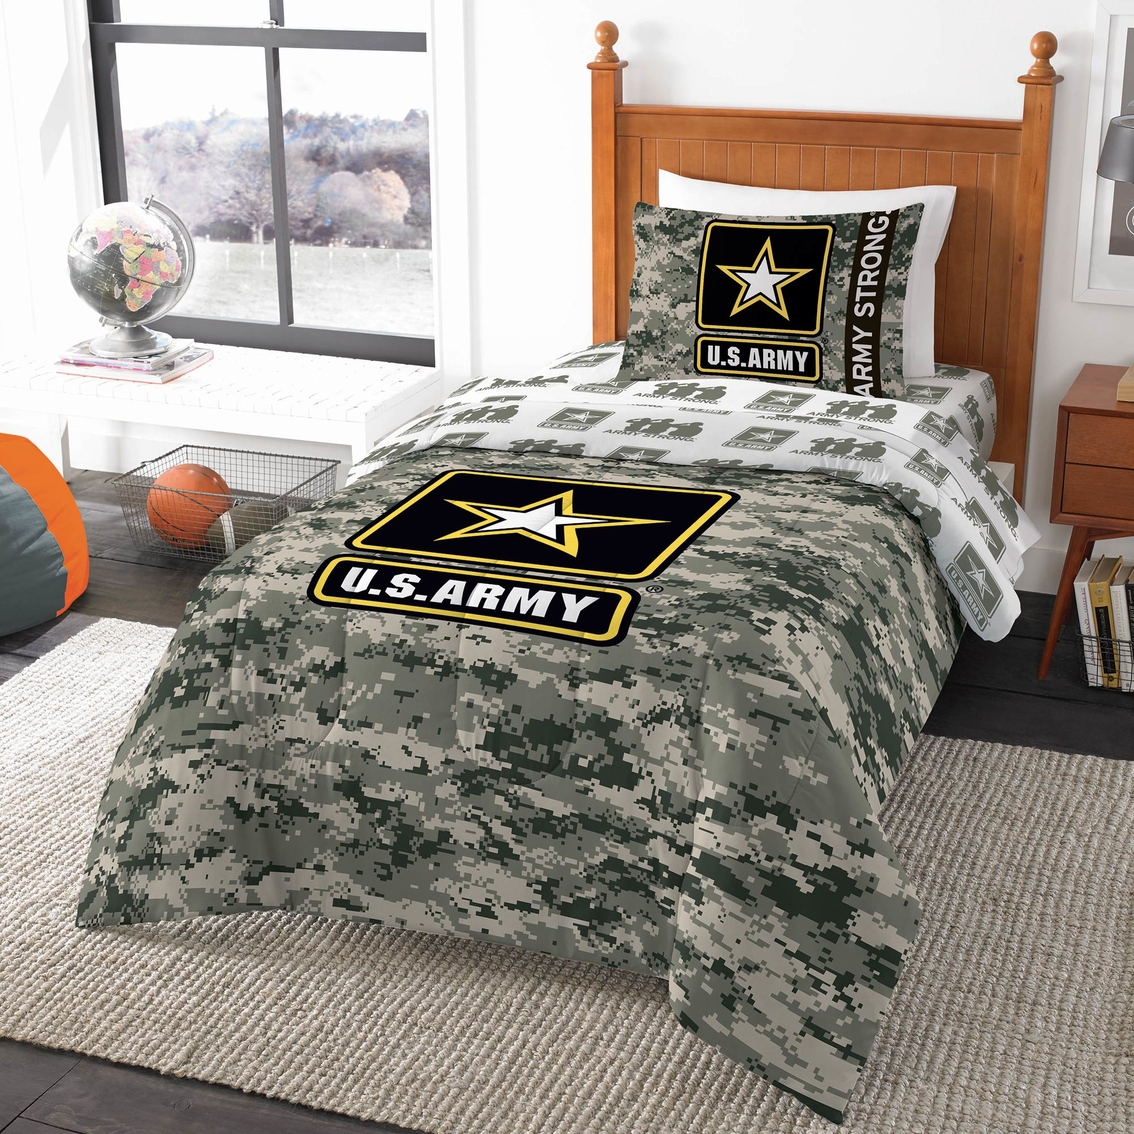 Twin Army Camo Comforter Atg Archive, Army Camo Twin Bedding